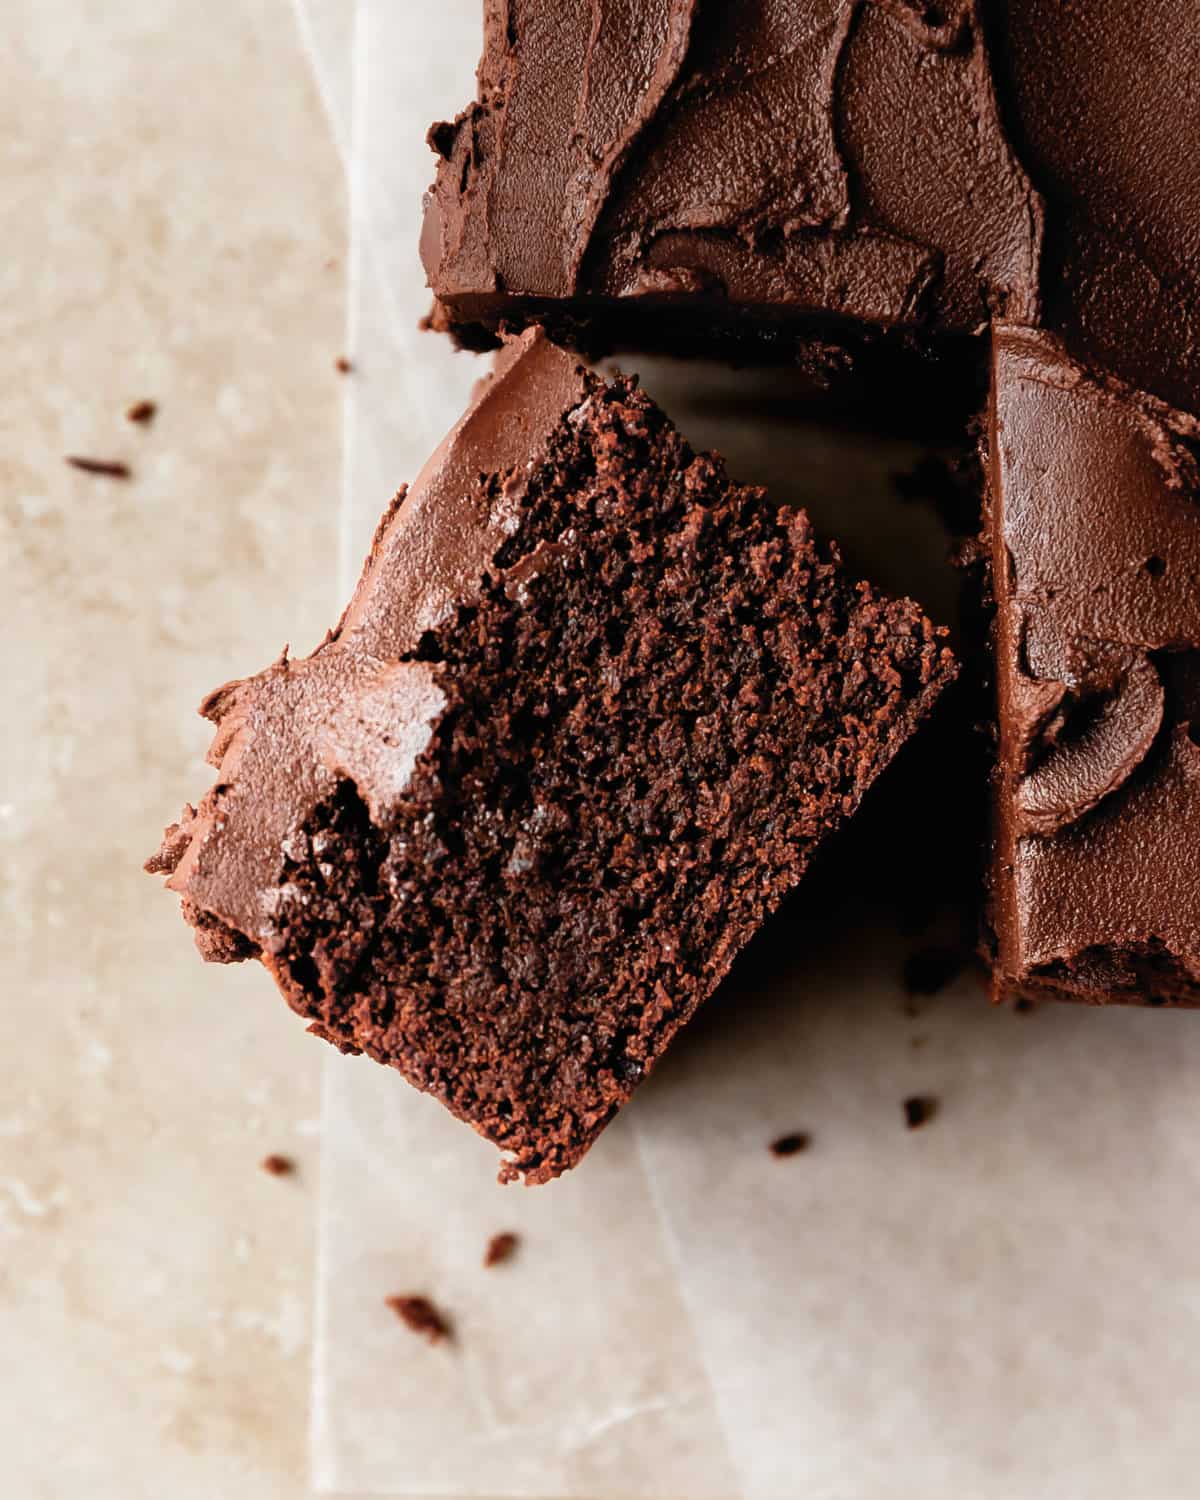 Chocolate fudge cake is a rich, dense moist and fudgy chocolate cake topped with a creamy chocolate ganache frosting. This fudge cake recipe is easy to make in one bowl and is the perfect simple, but decadent fudgy chocolate cake. 